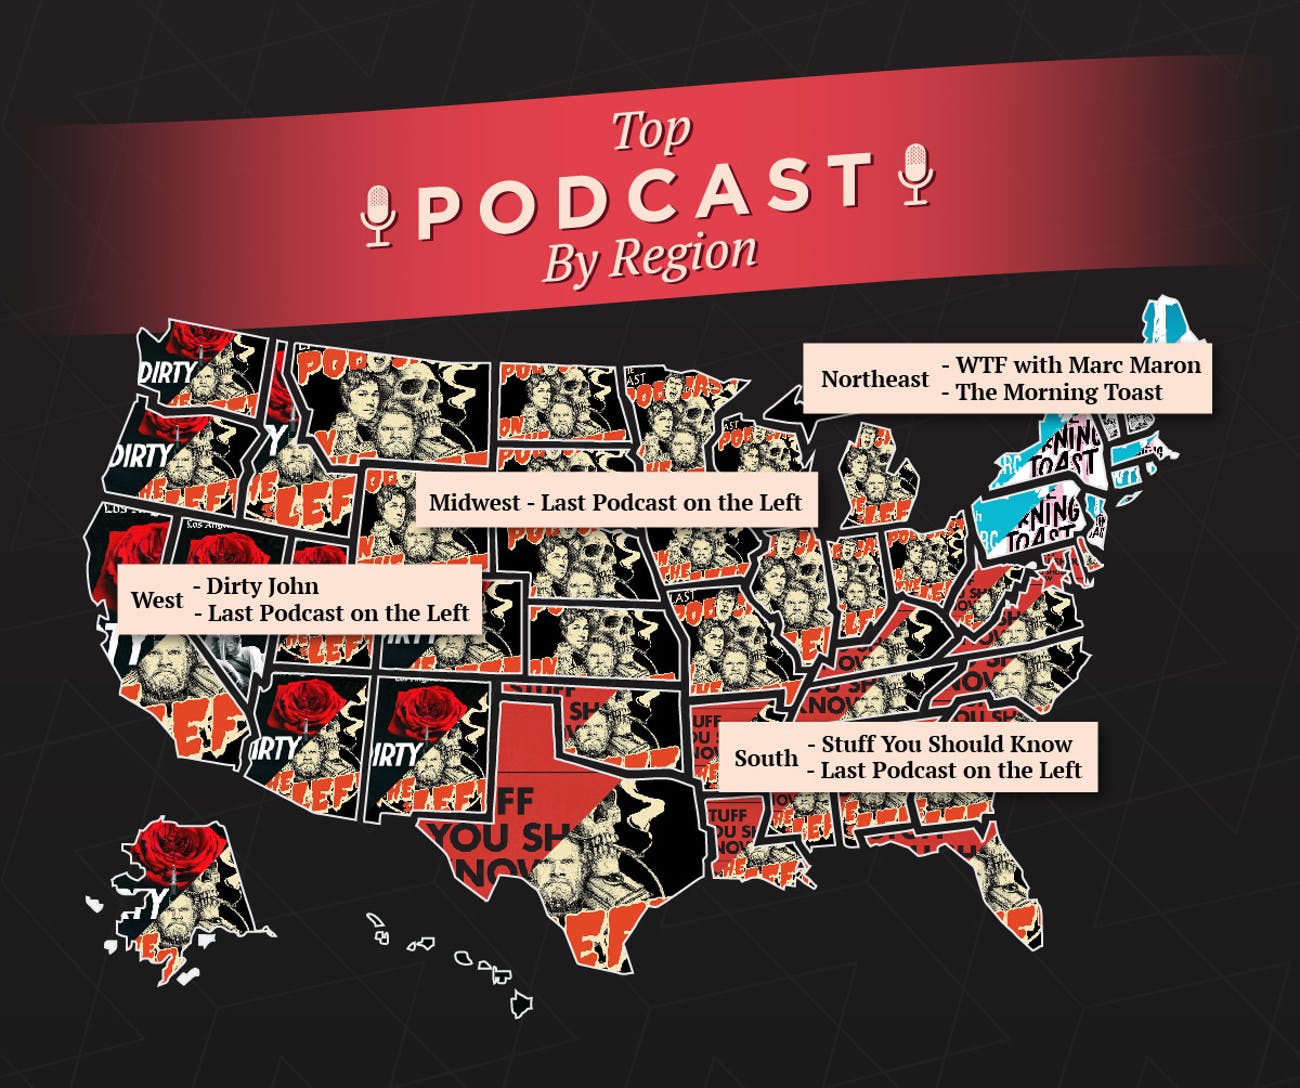 Most Popular Podcasts